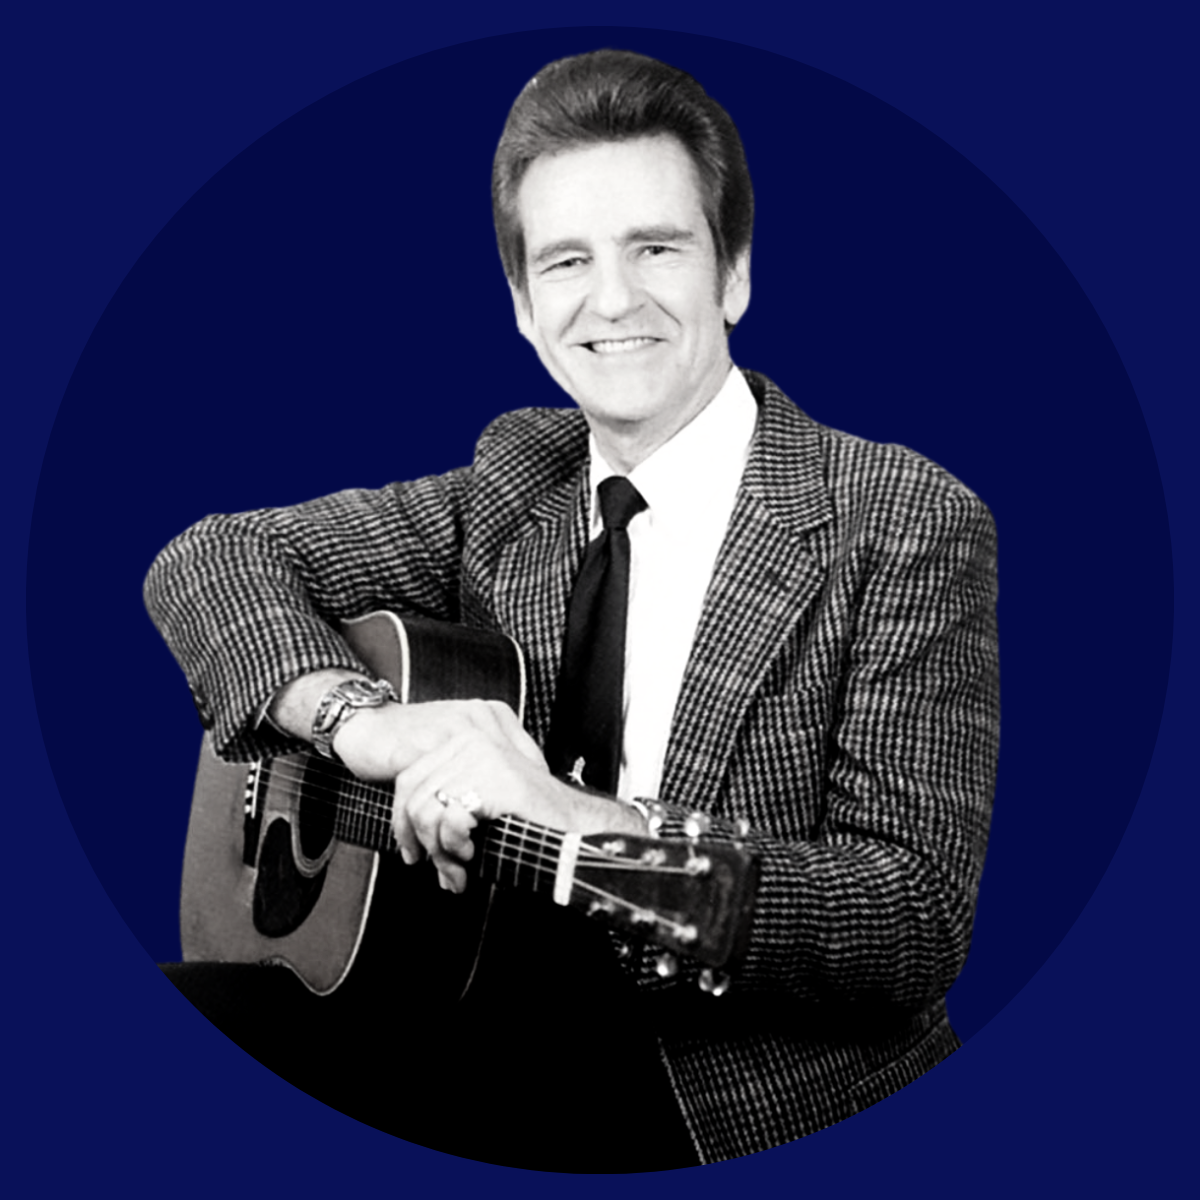 During Lockdown, Del McCoury Finally Got Around to 